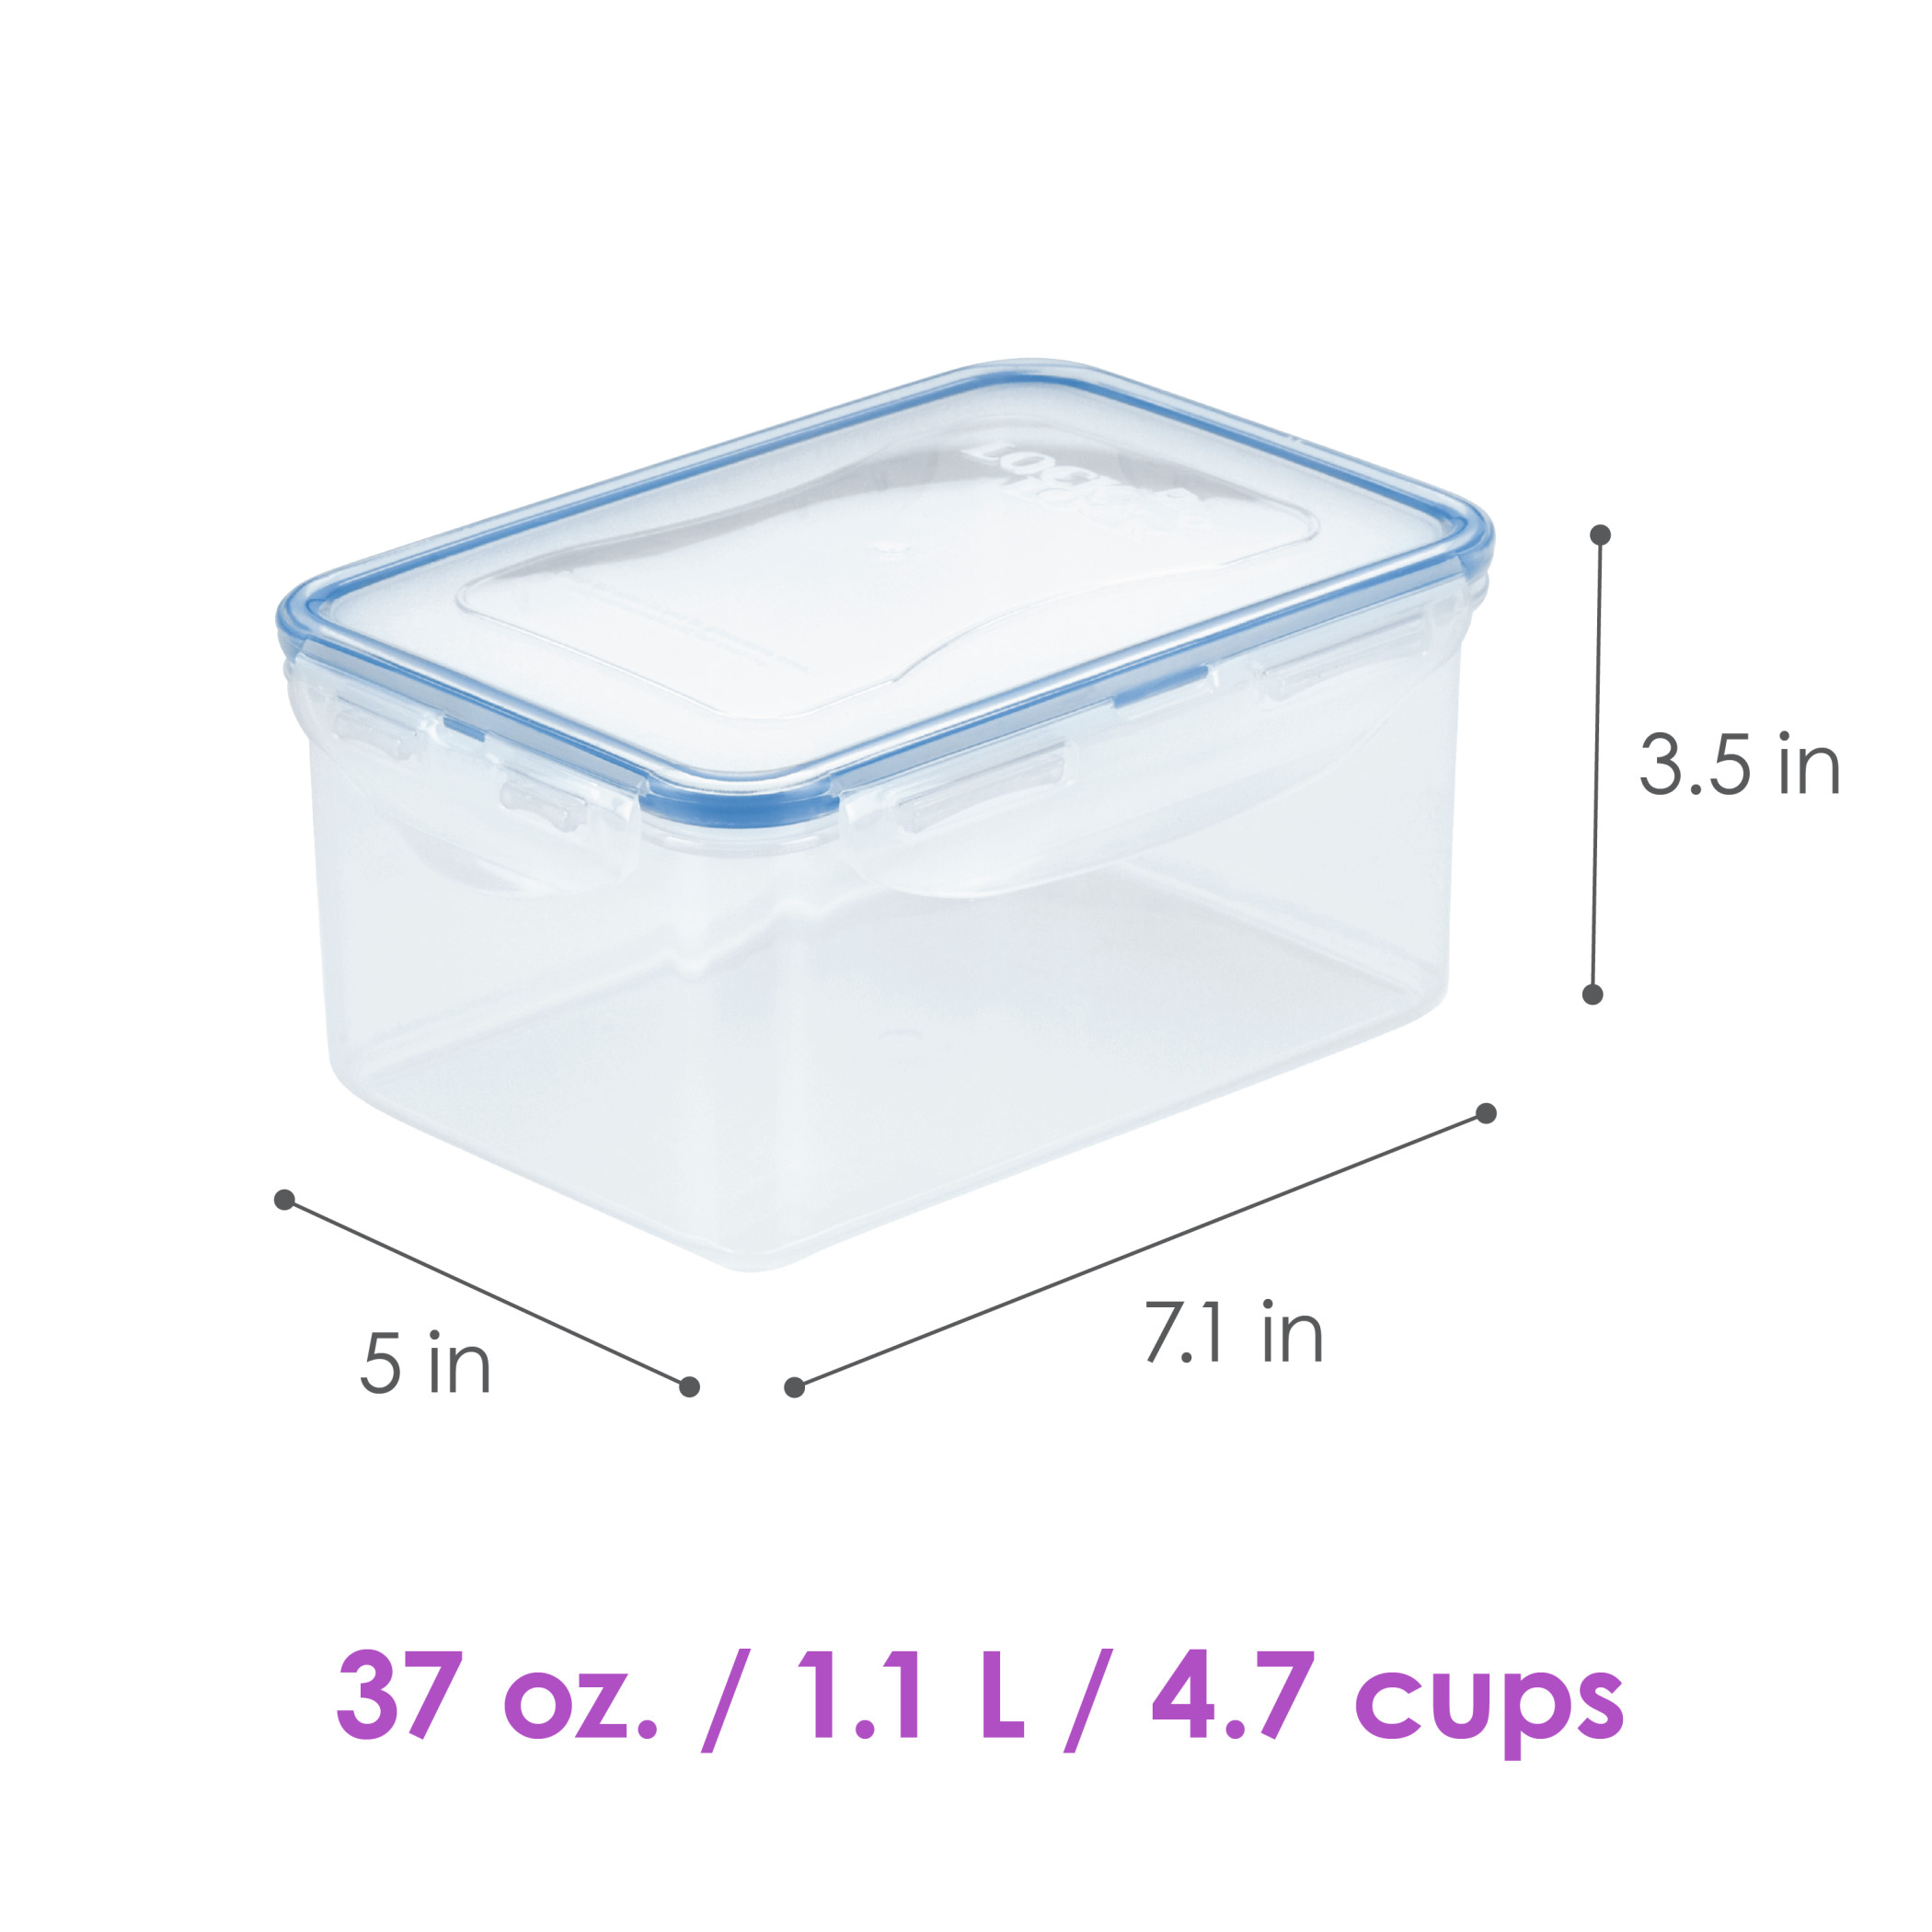 Yirtree Airtight Plastic Food Storage Container, Rectangular Small Storage Boxes, Microwave, Freezer and Dishwasher Safe, Size: 6.97 x 4.92 x 2.17